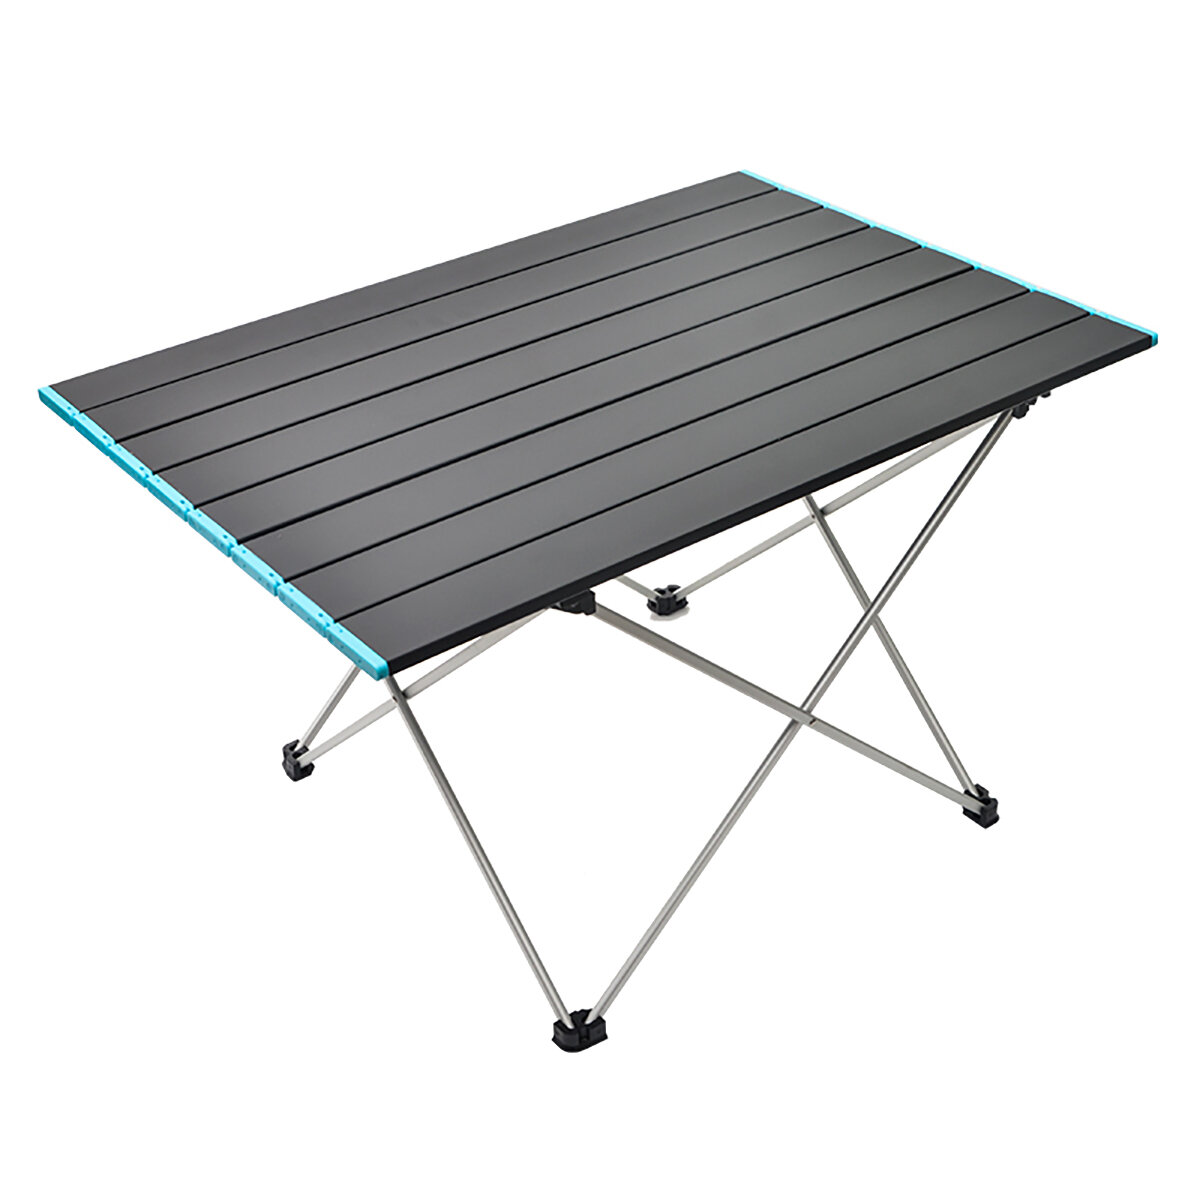 Outdoor Aluminum Alloy Folding Table Portable Ultra-Light Picnic Camping Aluminum Plate Desk Barbecue Self-Driving Furniture